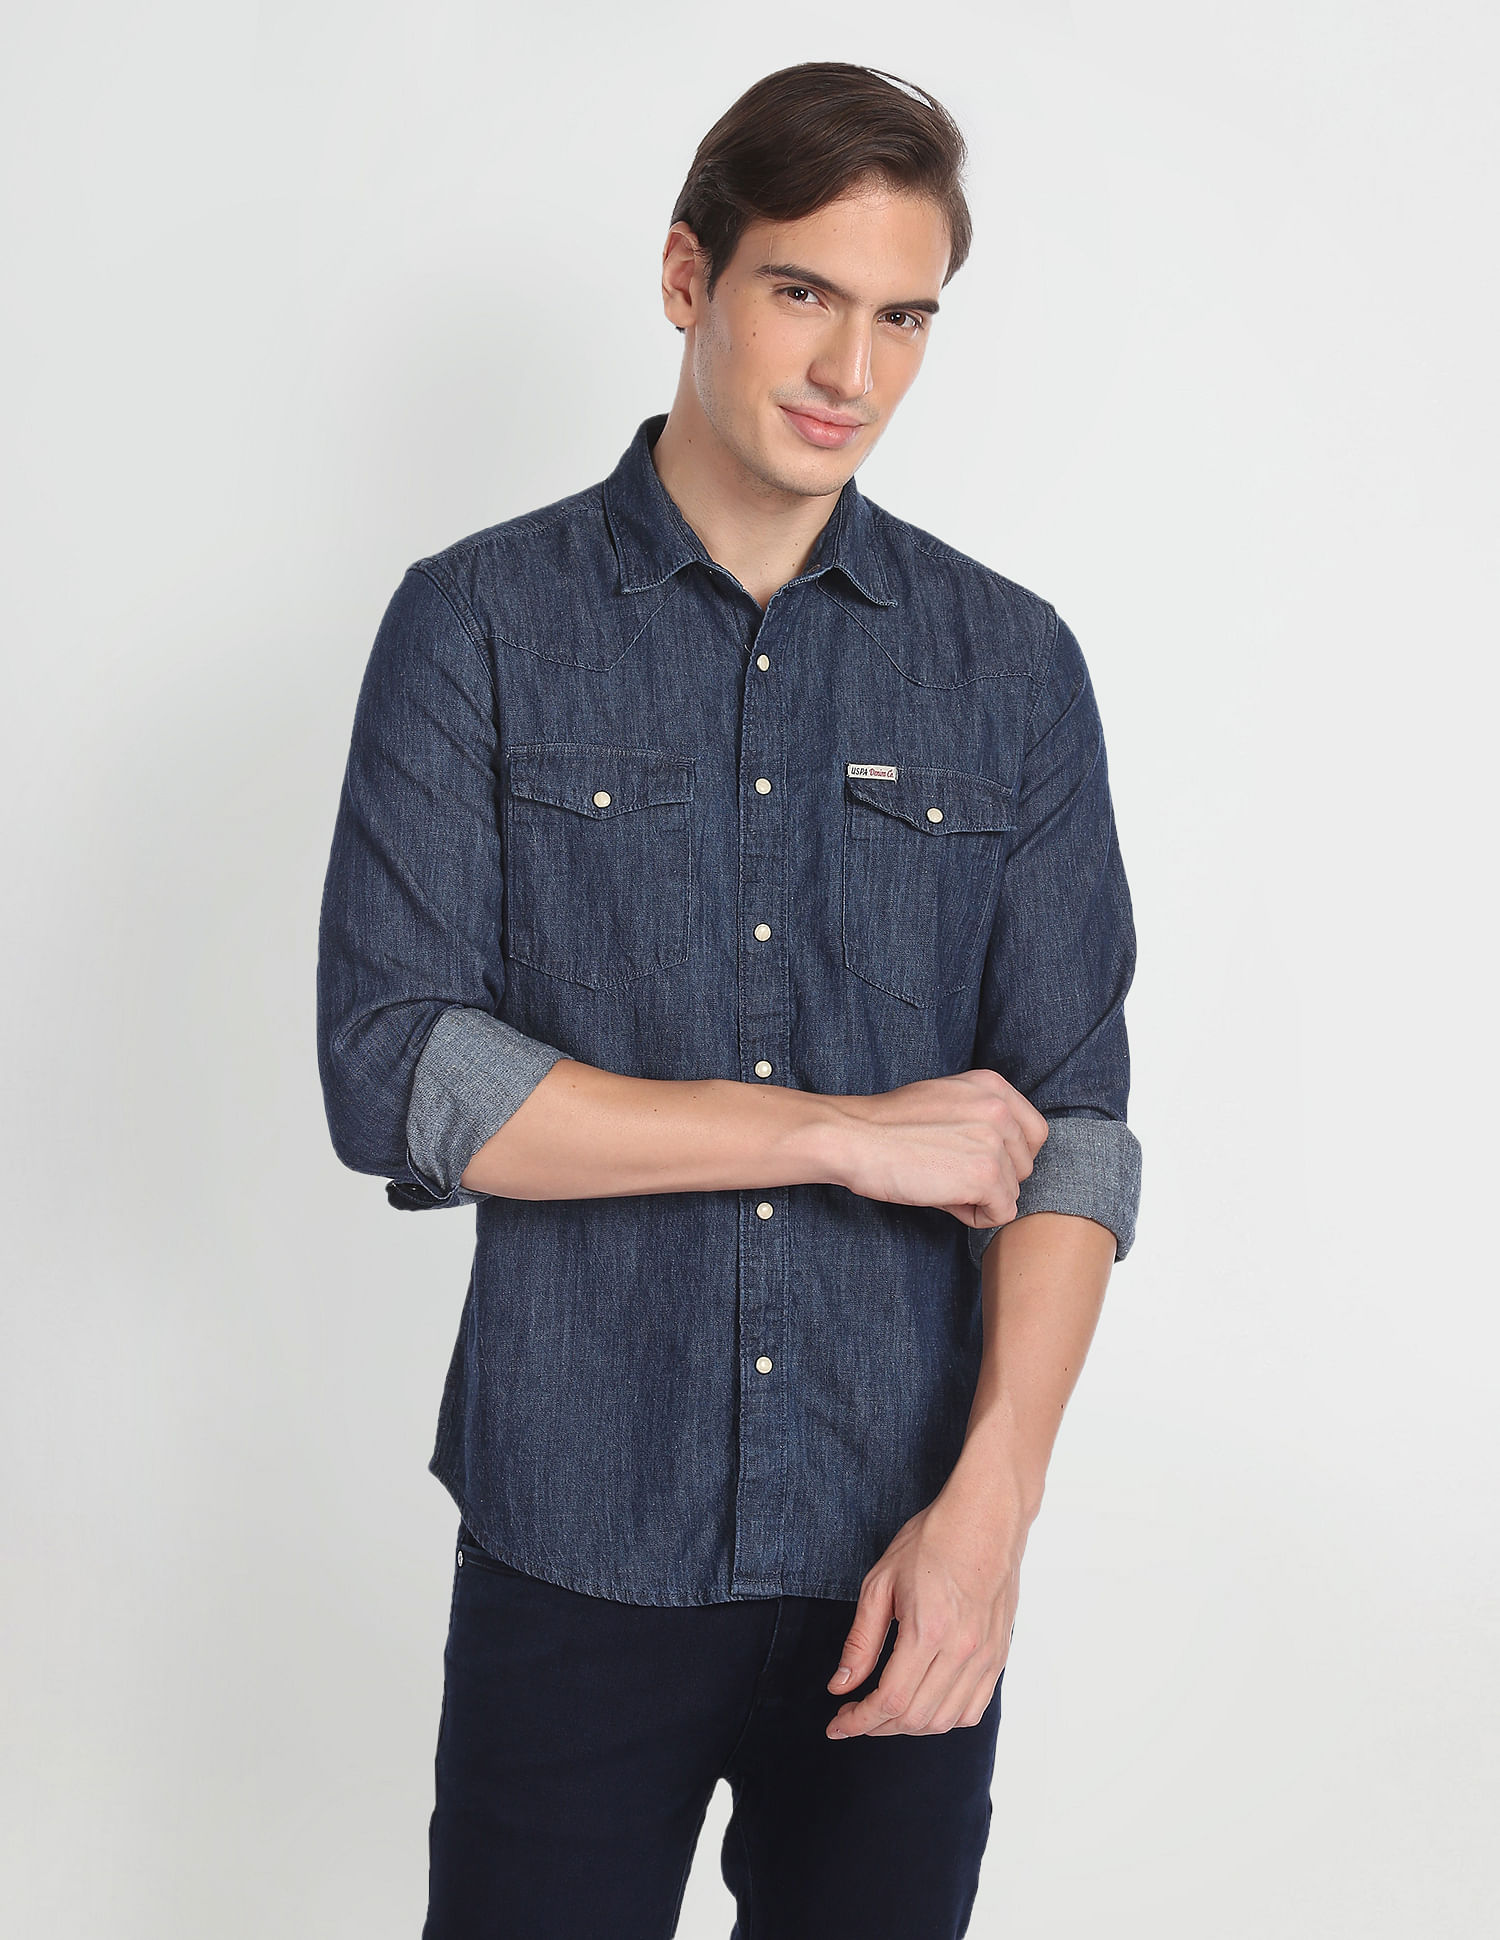 Shirts for Men  Buy Slim Fit Casual Shirts for Men Online in India   Wrangler